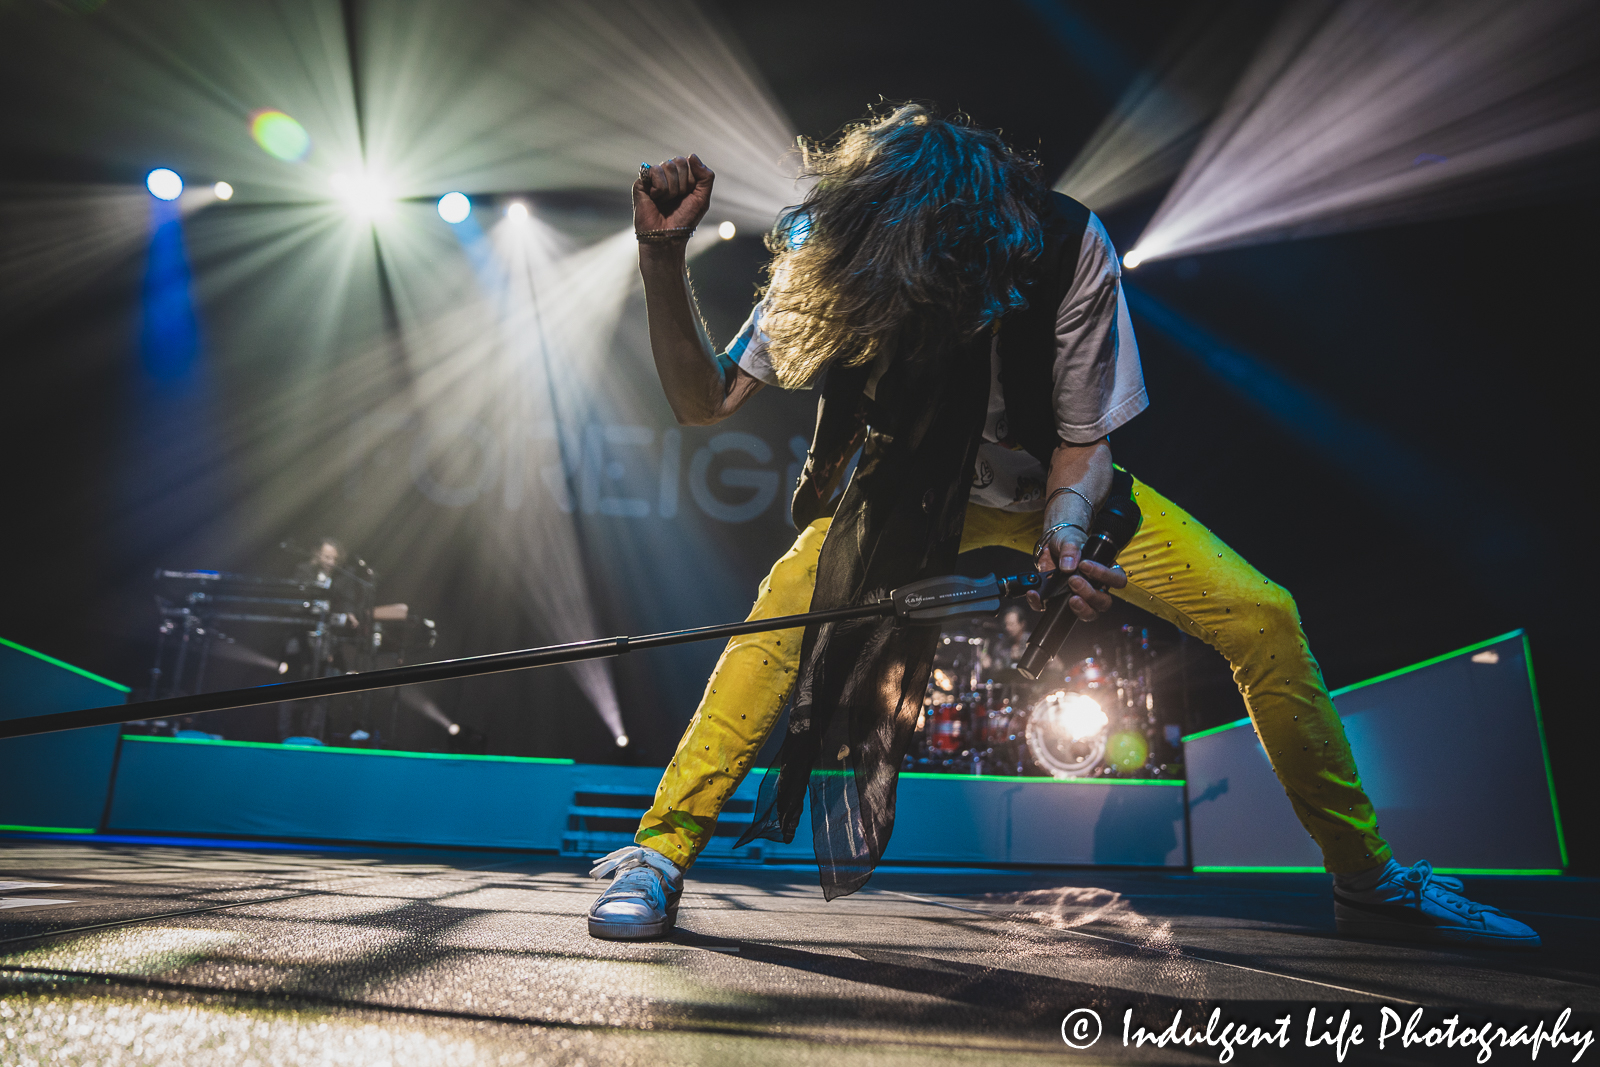 Lead vocalist Kelly Hansen of Foreigner performing "Cold as Ice" live at Landon Arena inside of Stormont Vail Events Center in Topeka, KS on May 2, 2023.